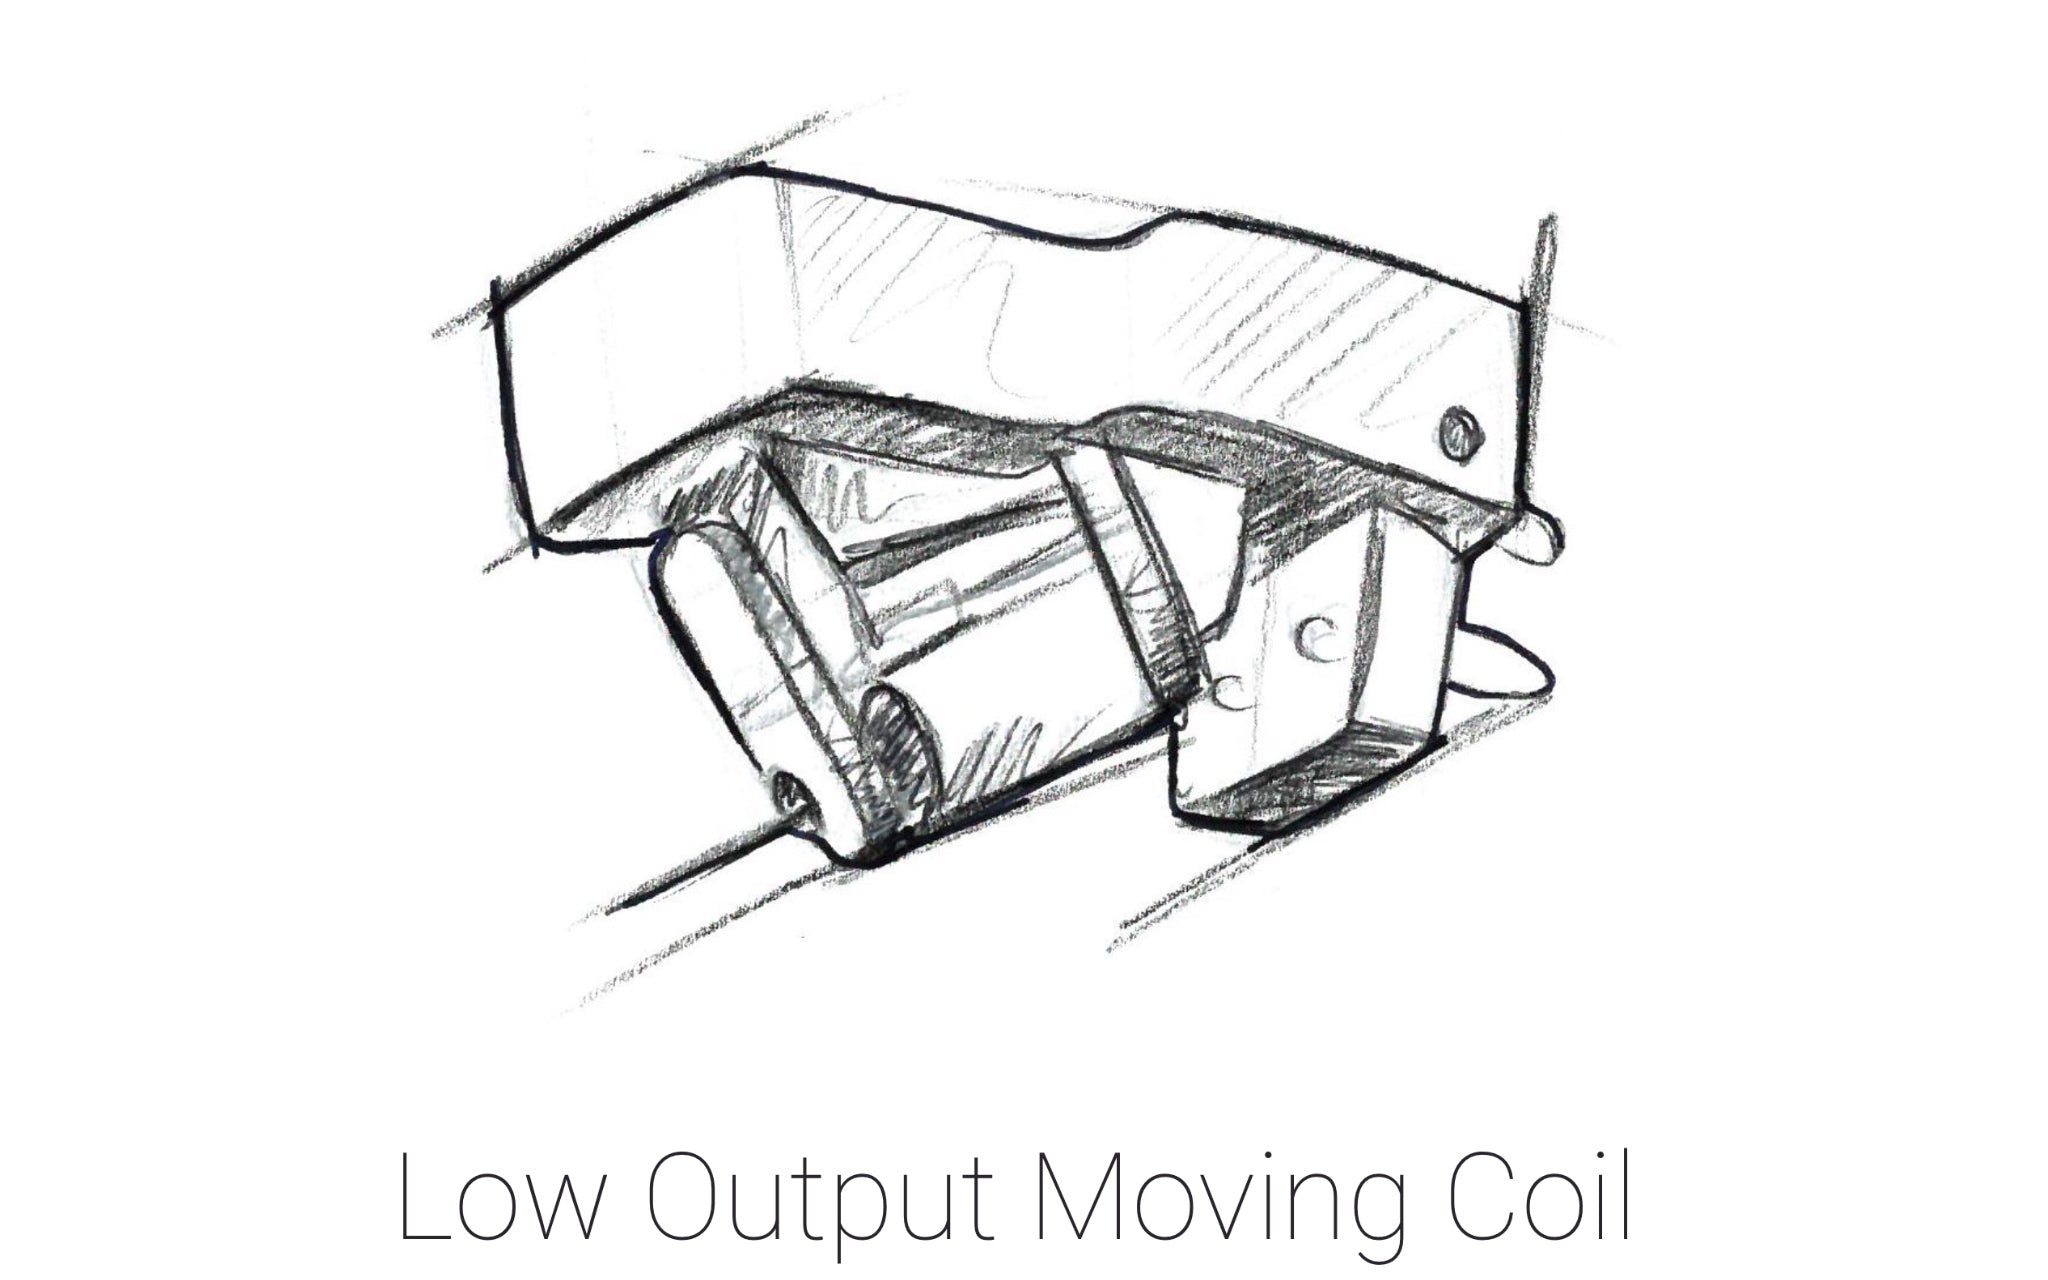 Moving coil charcoal sketch over white background